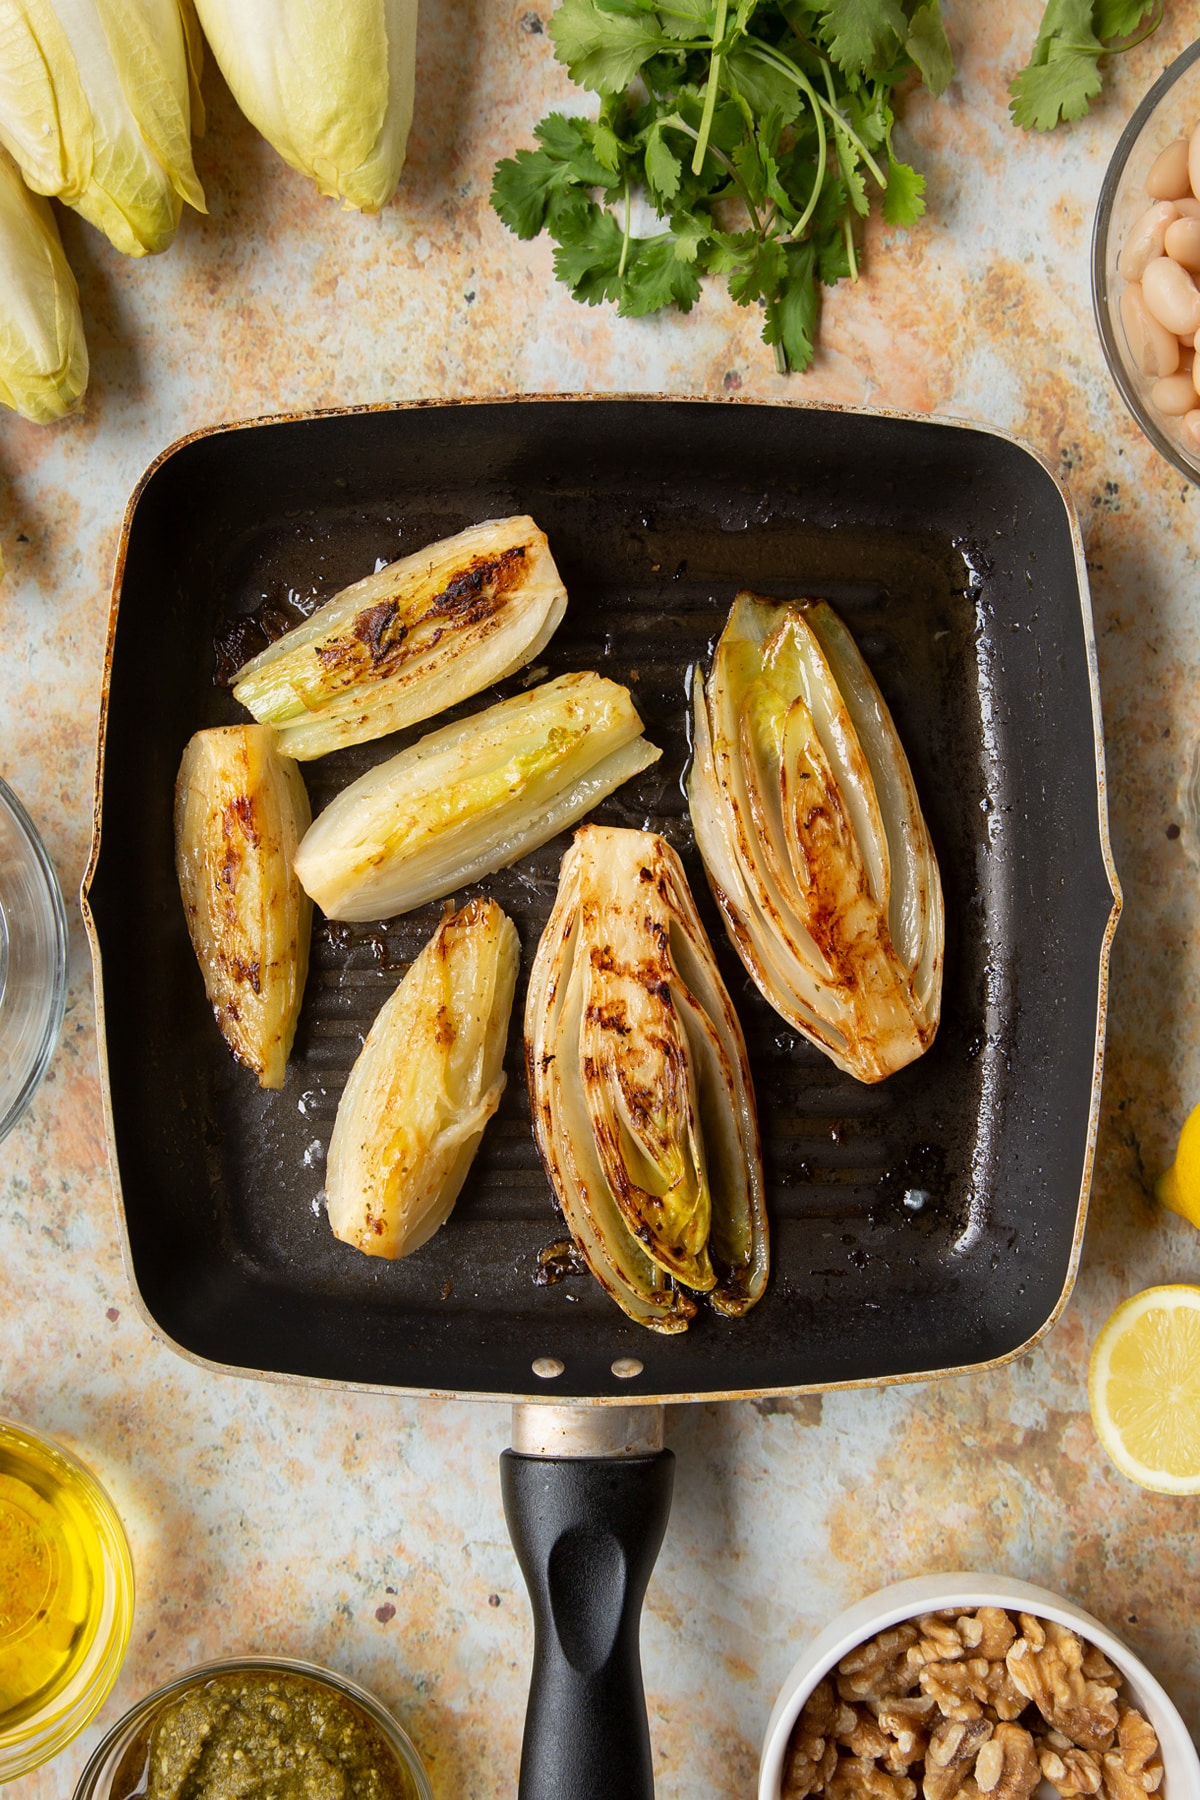 Braised chicory and fennel in a griddle pan.